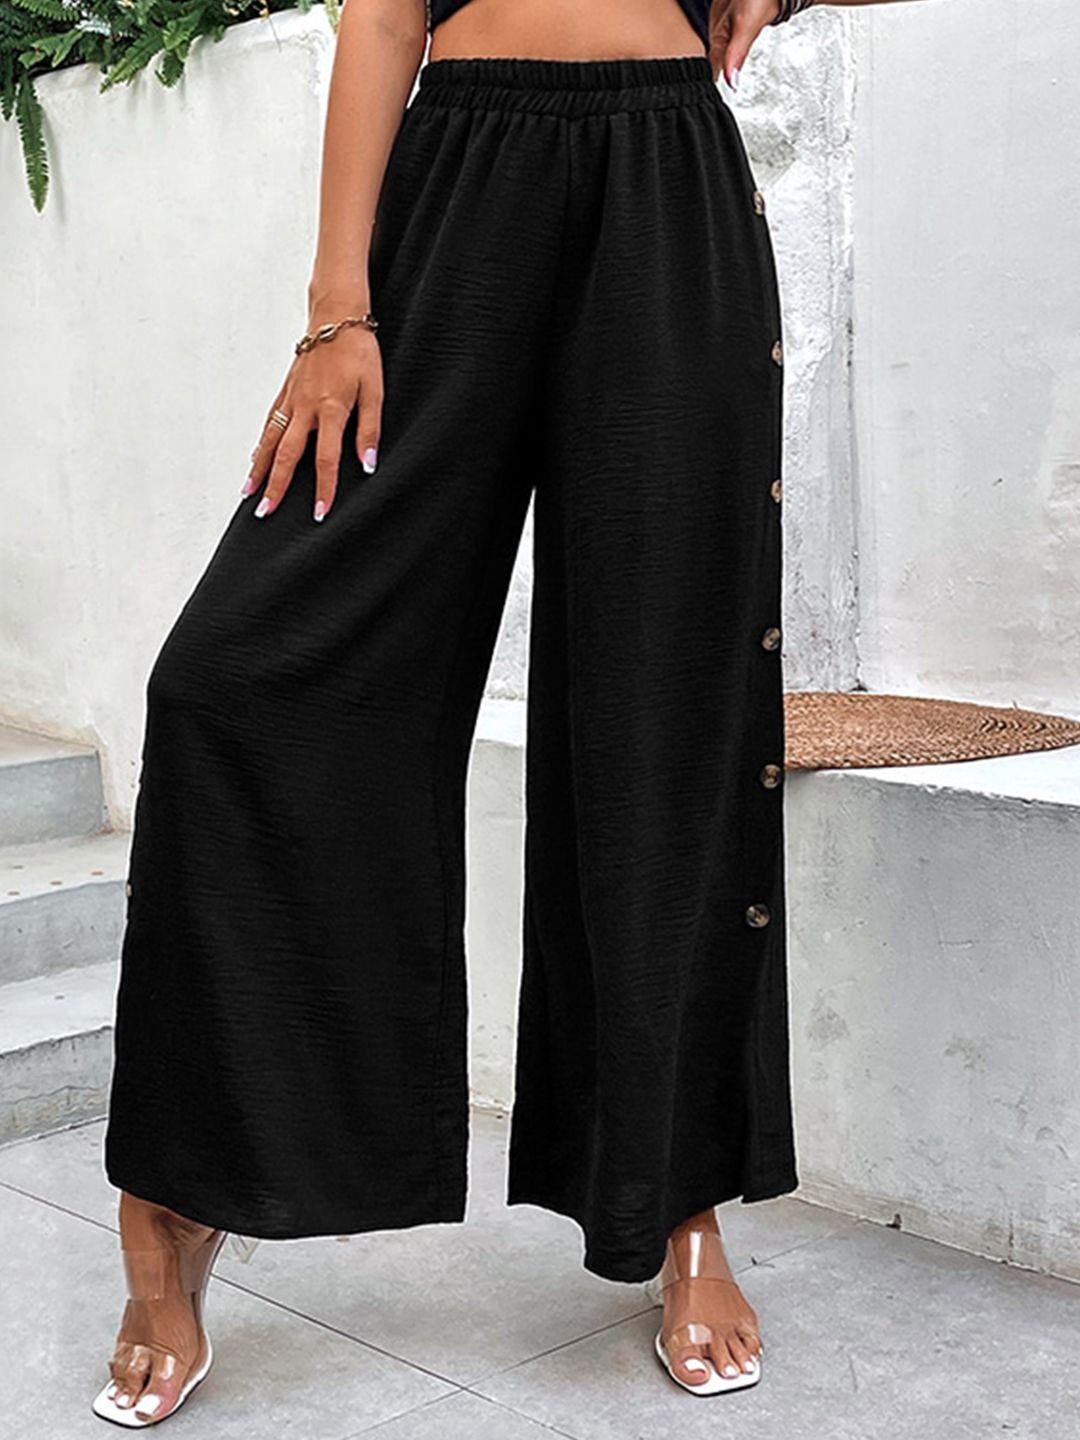 stylecast women black flared high-rise parallel trousers